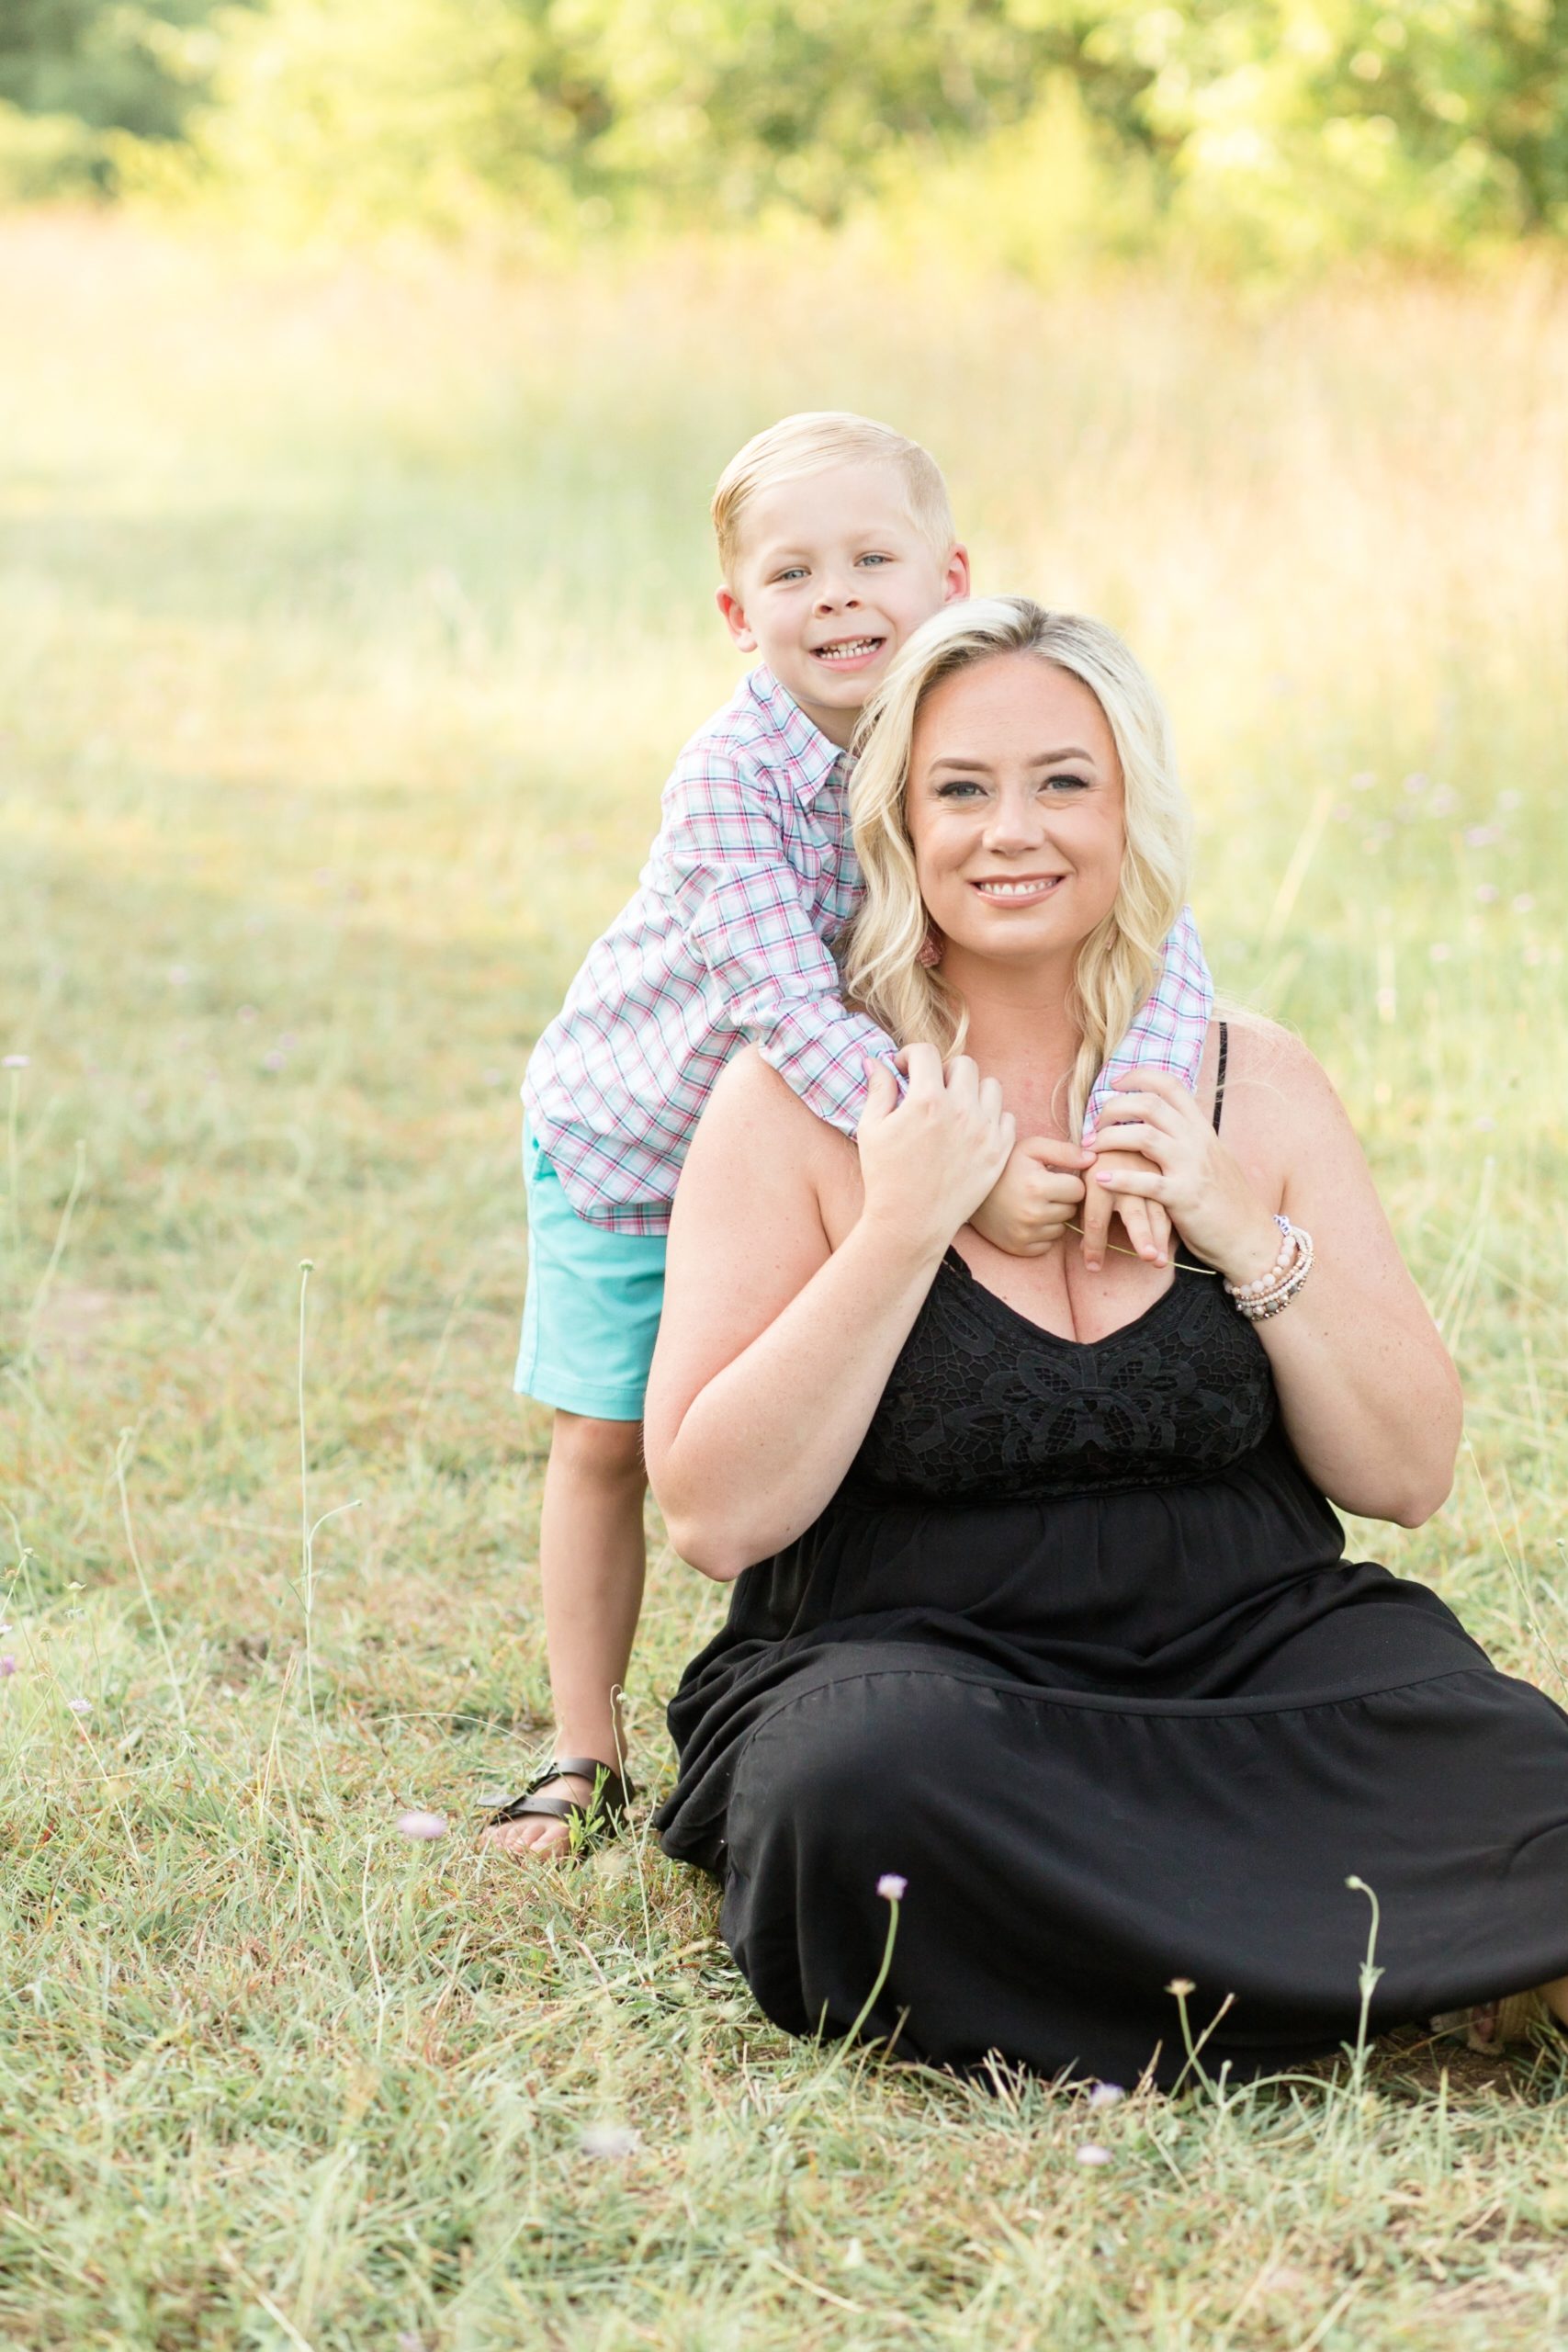 Young boy stands in field and hugs mom of grass for portrait session with mom during the summer at Frisco Commons Park with family photography team Wisp + Willow Photography Co. This session was so precious! Click to see more from this live on the blog now!